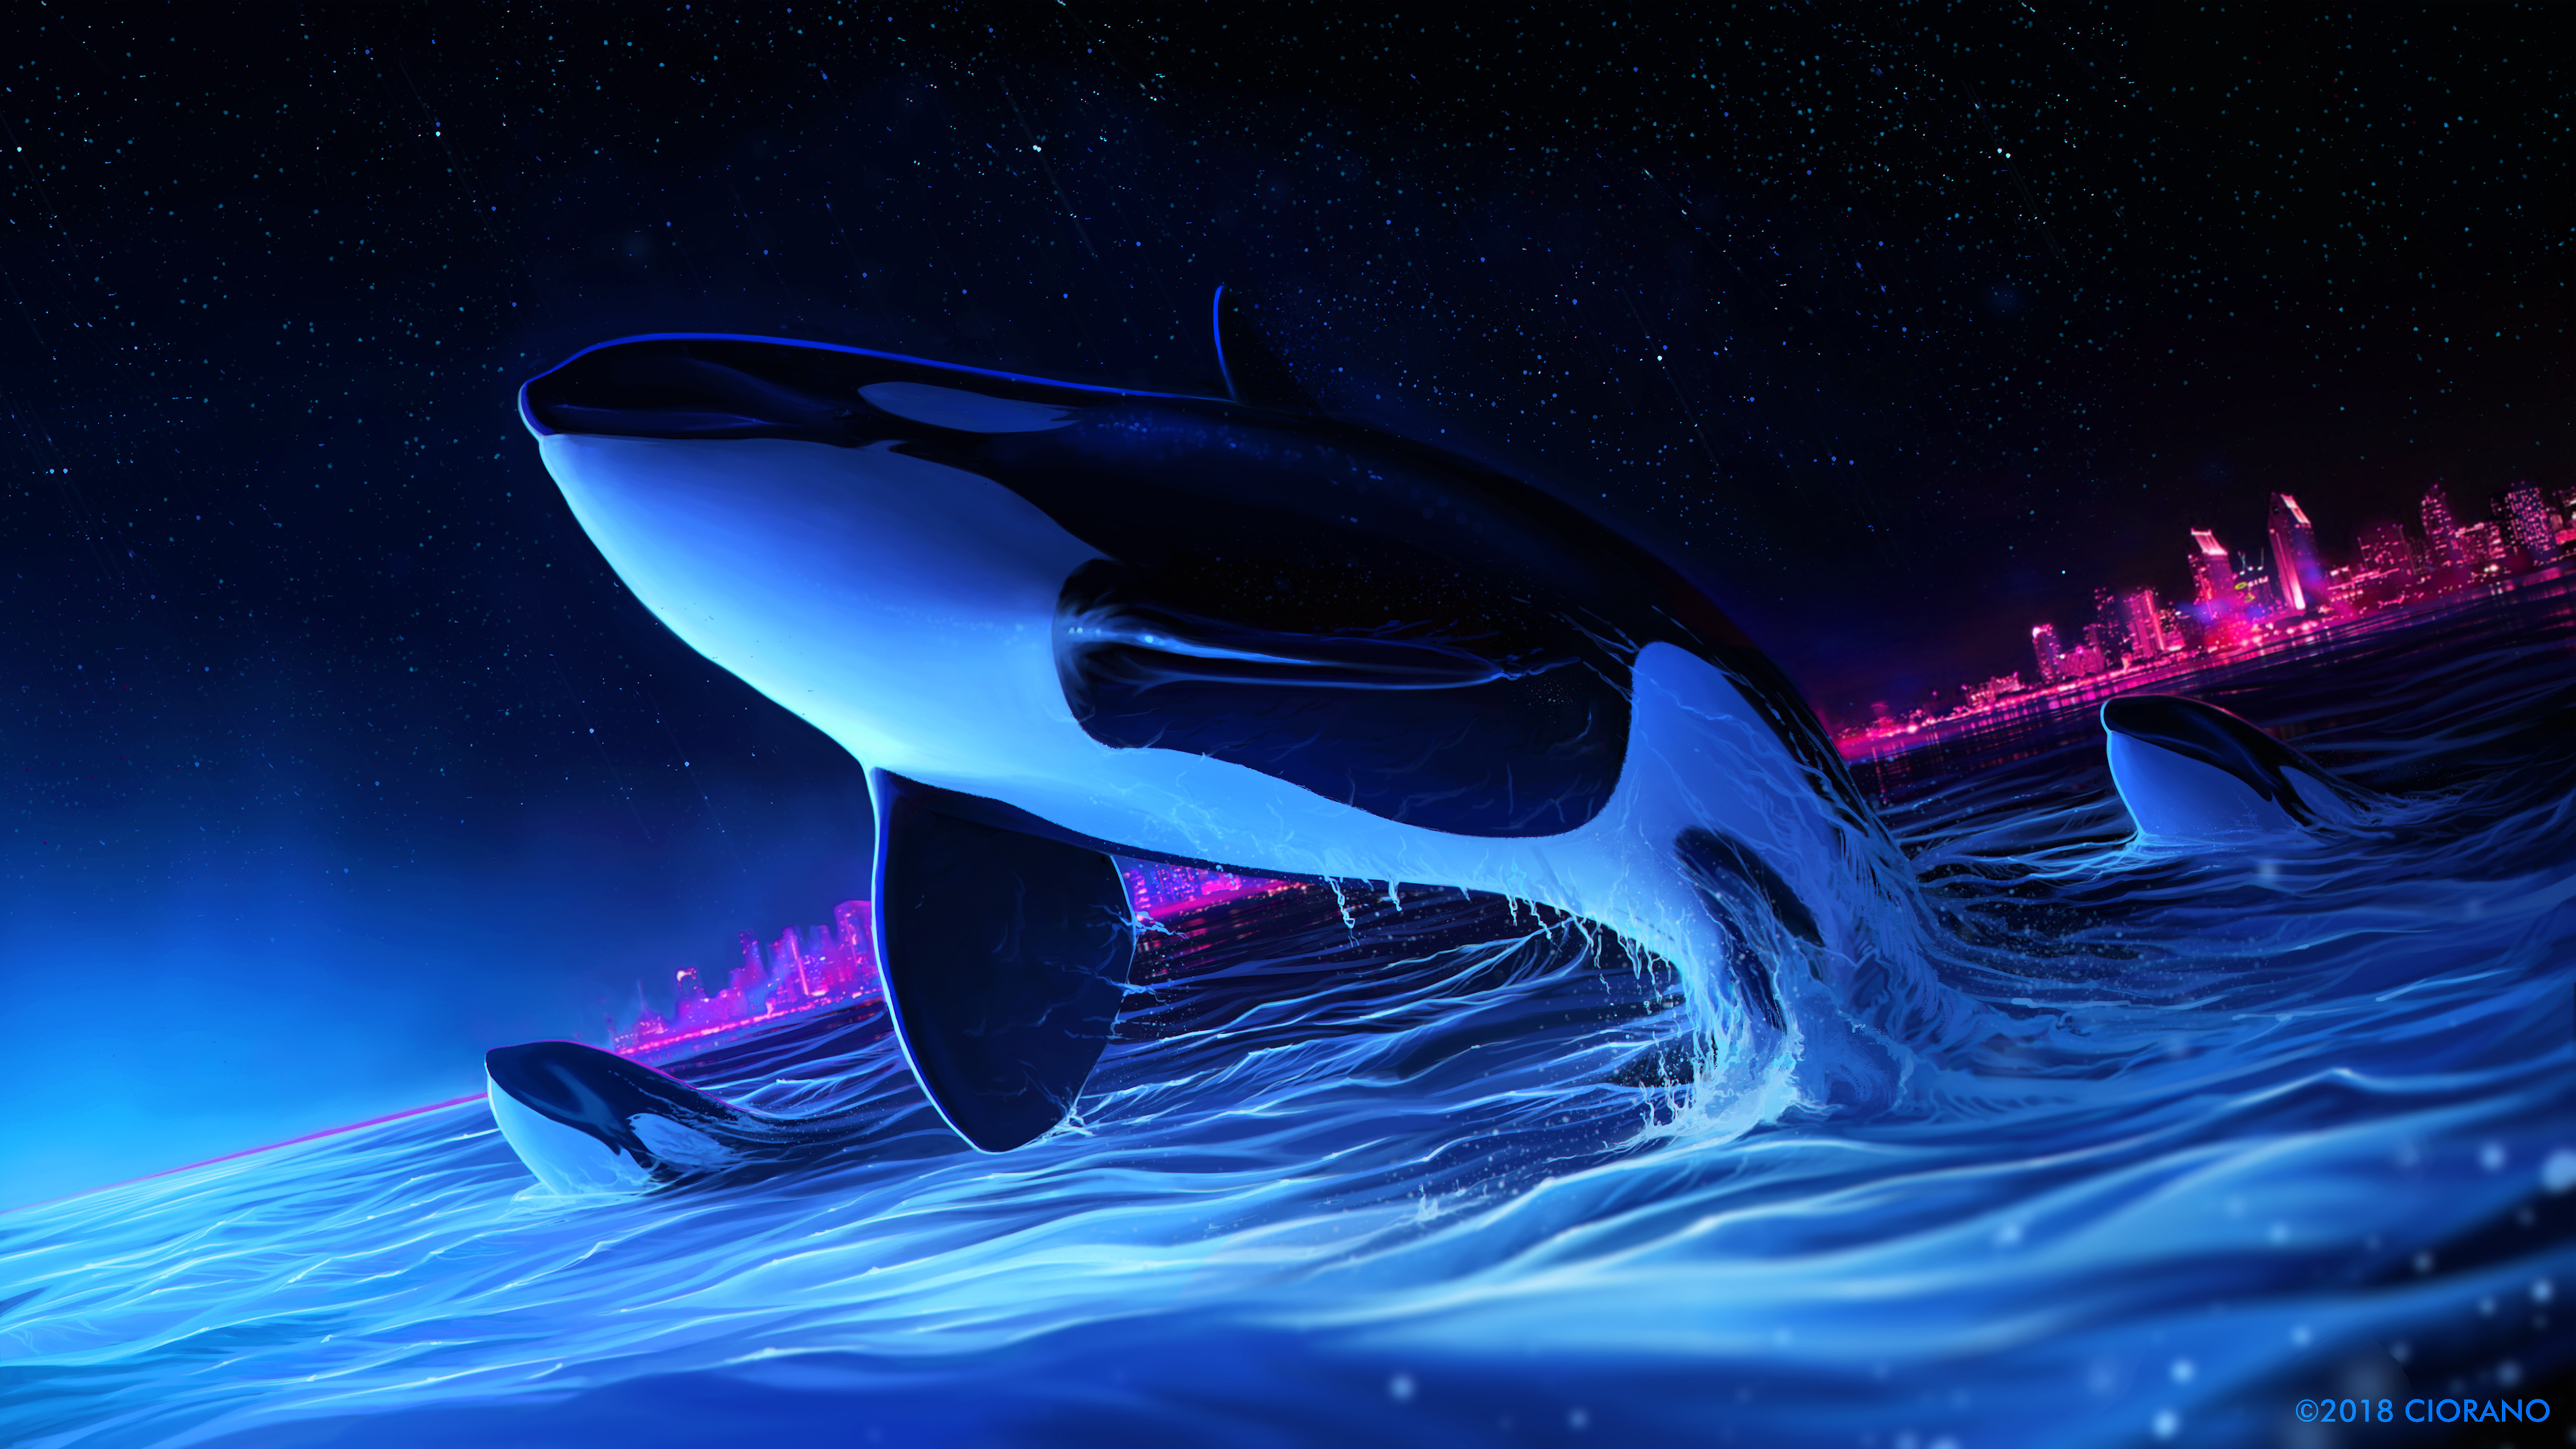 dolphin night orca whale digital art 4k 1551642516 - Dolphin Night Orca Whale Digital Art 4k - whale wallpapers, hd-wallpapers, dolphin wallpapers, digital art wallpapers, deviantart wallpapers, artwork wallpapers, artist wallpapers